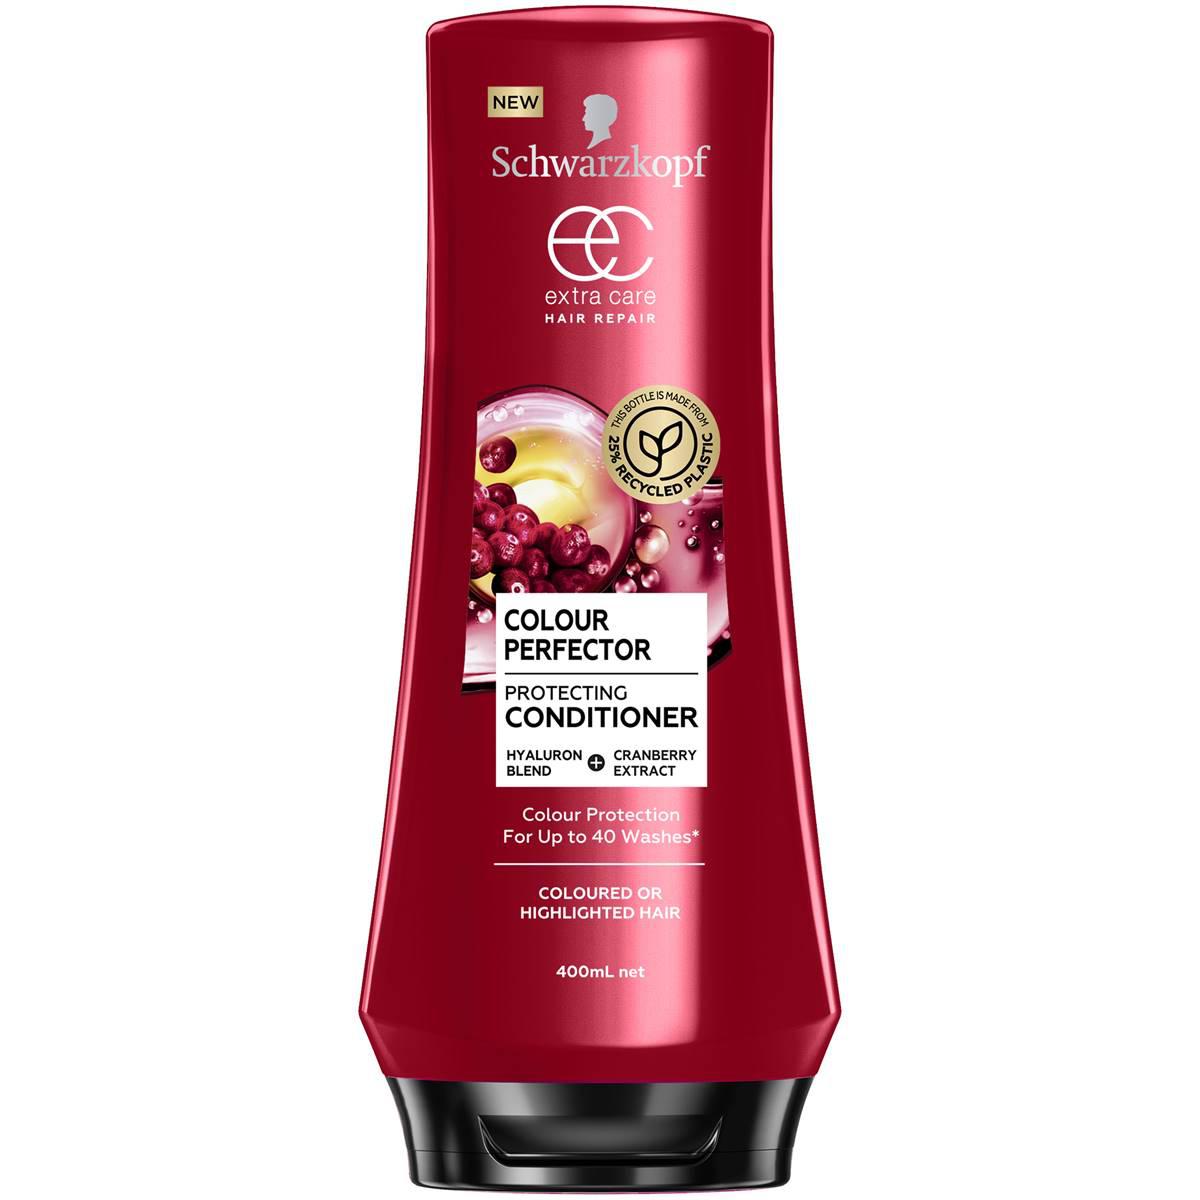 Schwarzkopf Extra Care Colour Perfector Protecting Conditioner 400ml